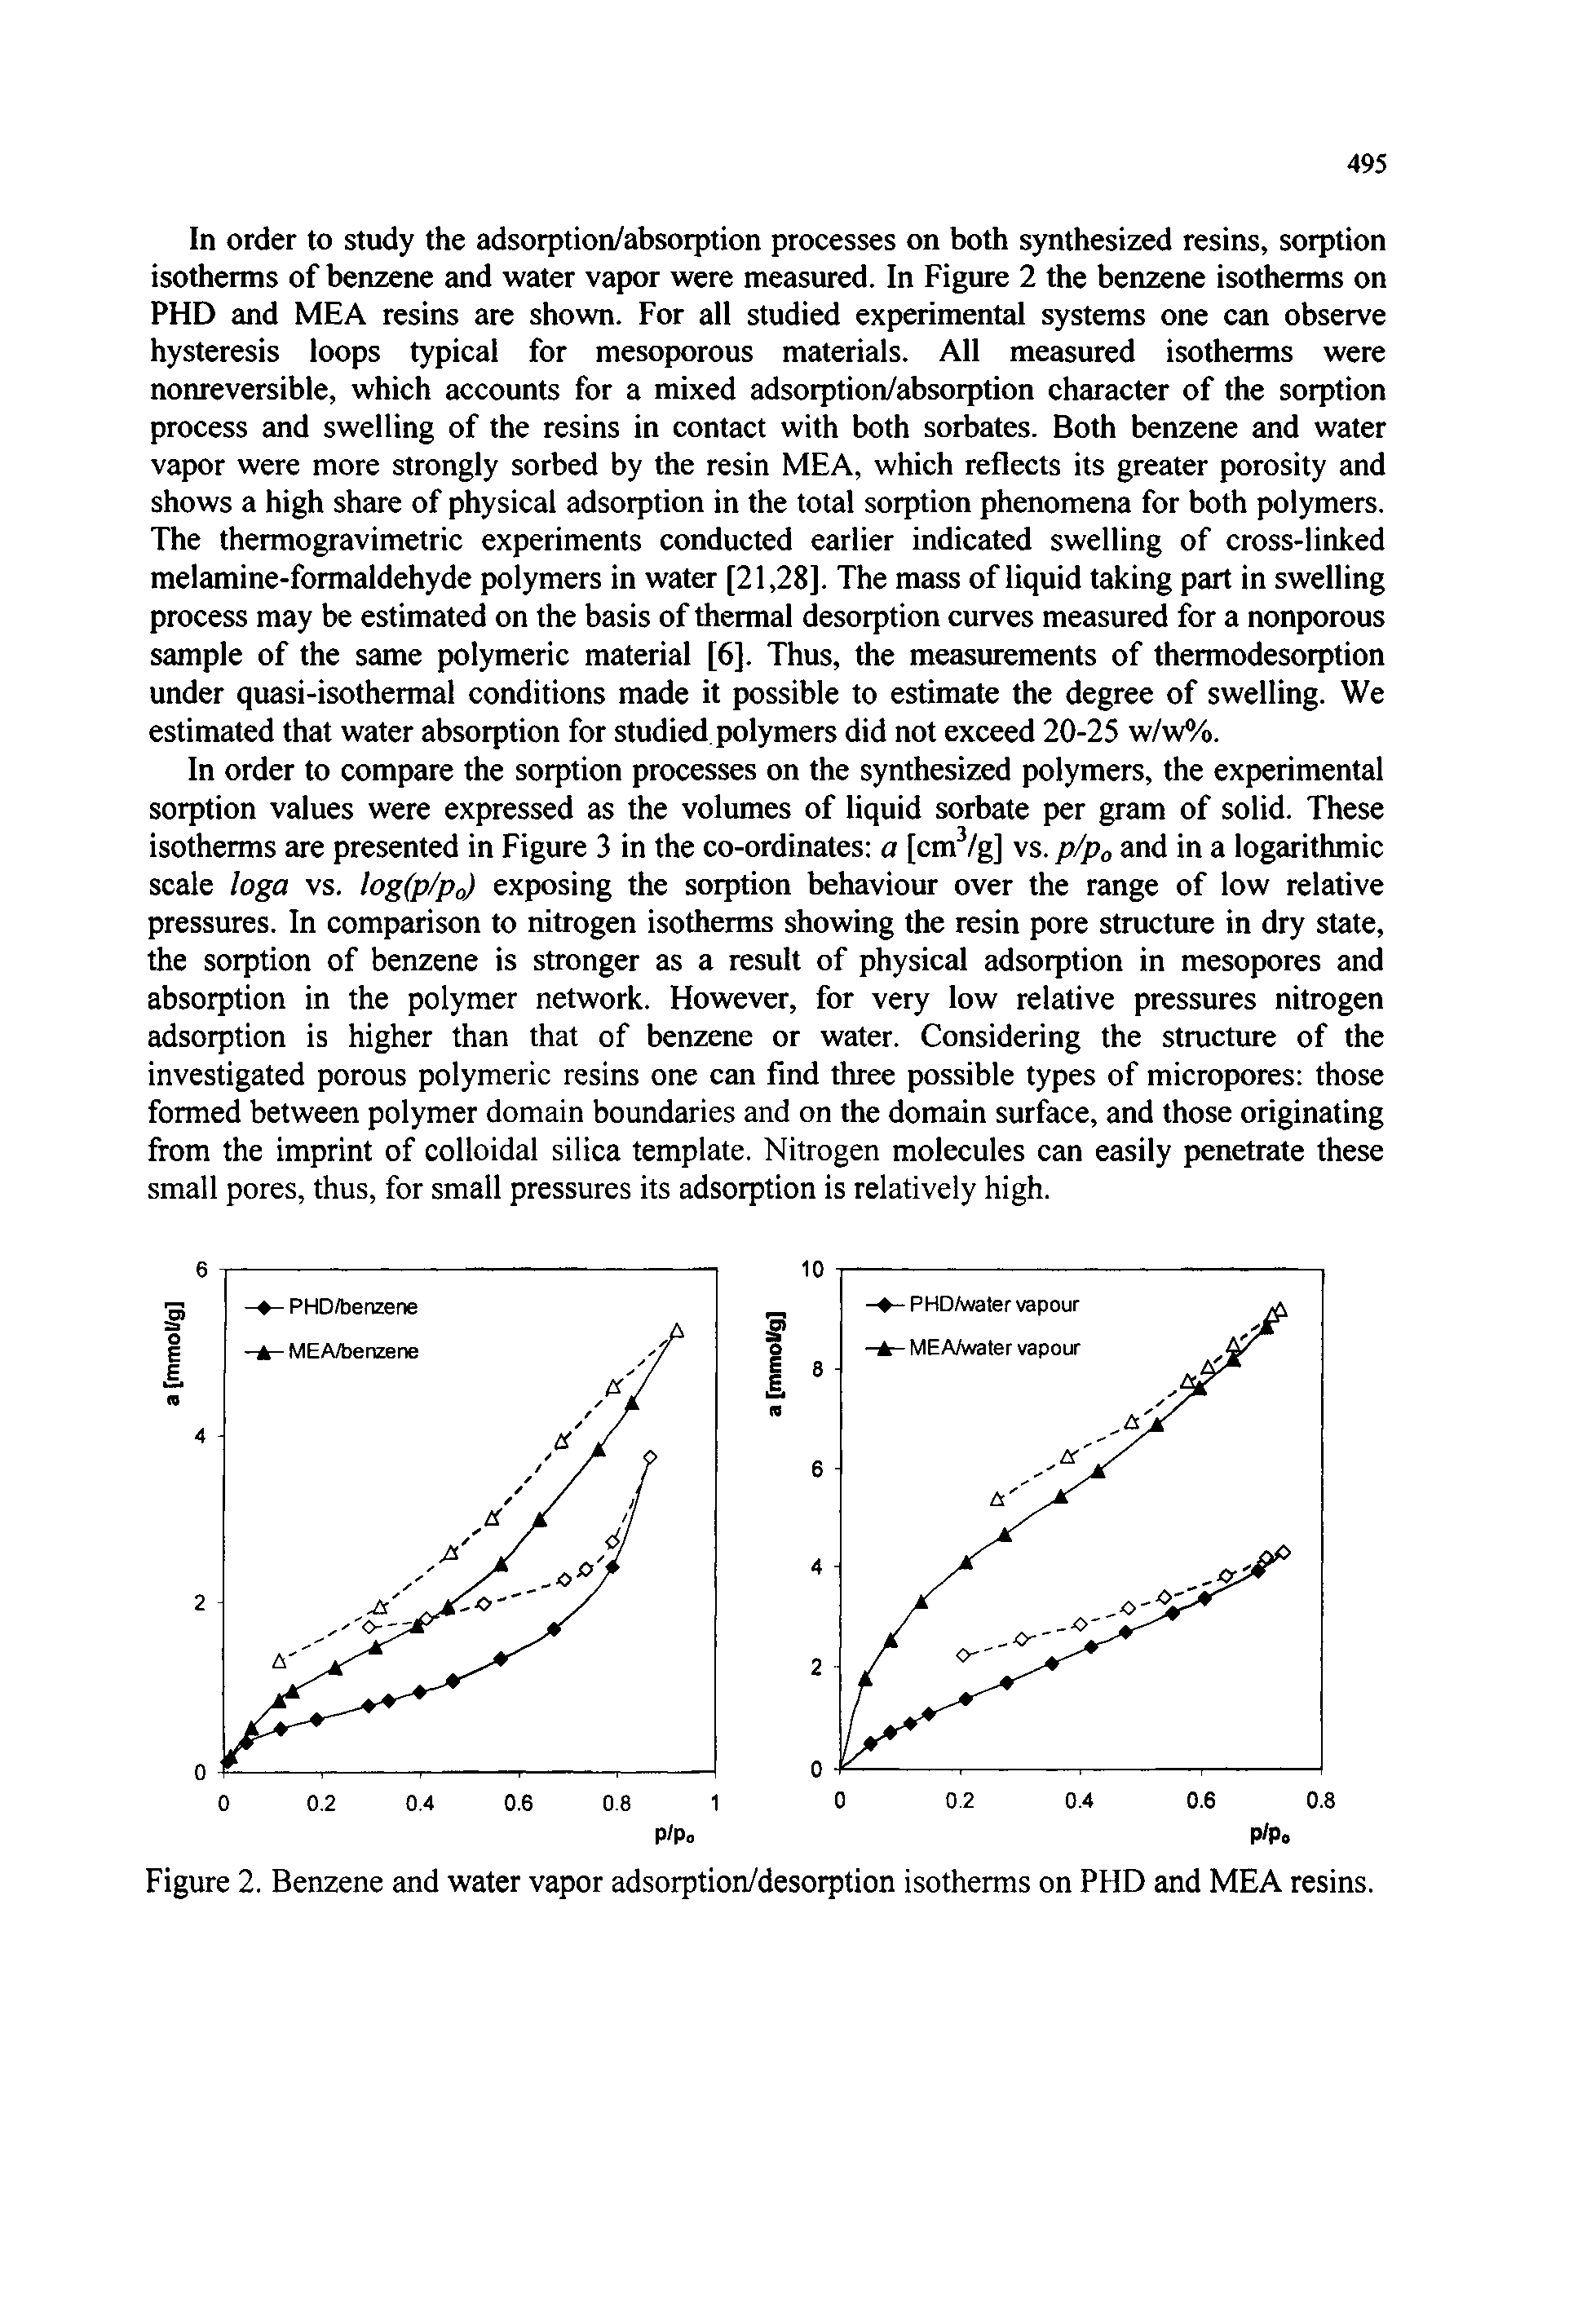 Figure 2. Benzene and water vapor adsorption/desorption isotherms on PHD and MEA resins.